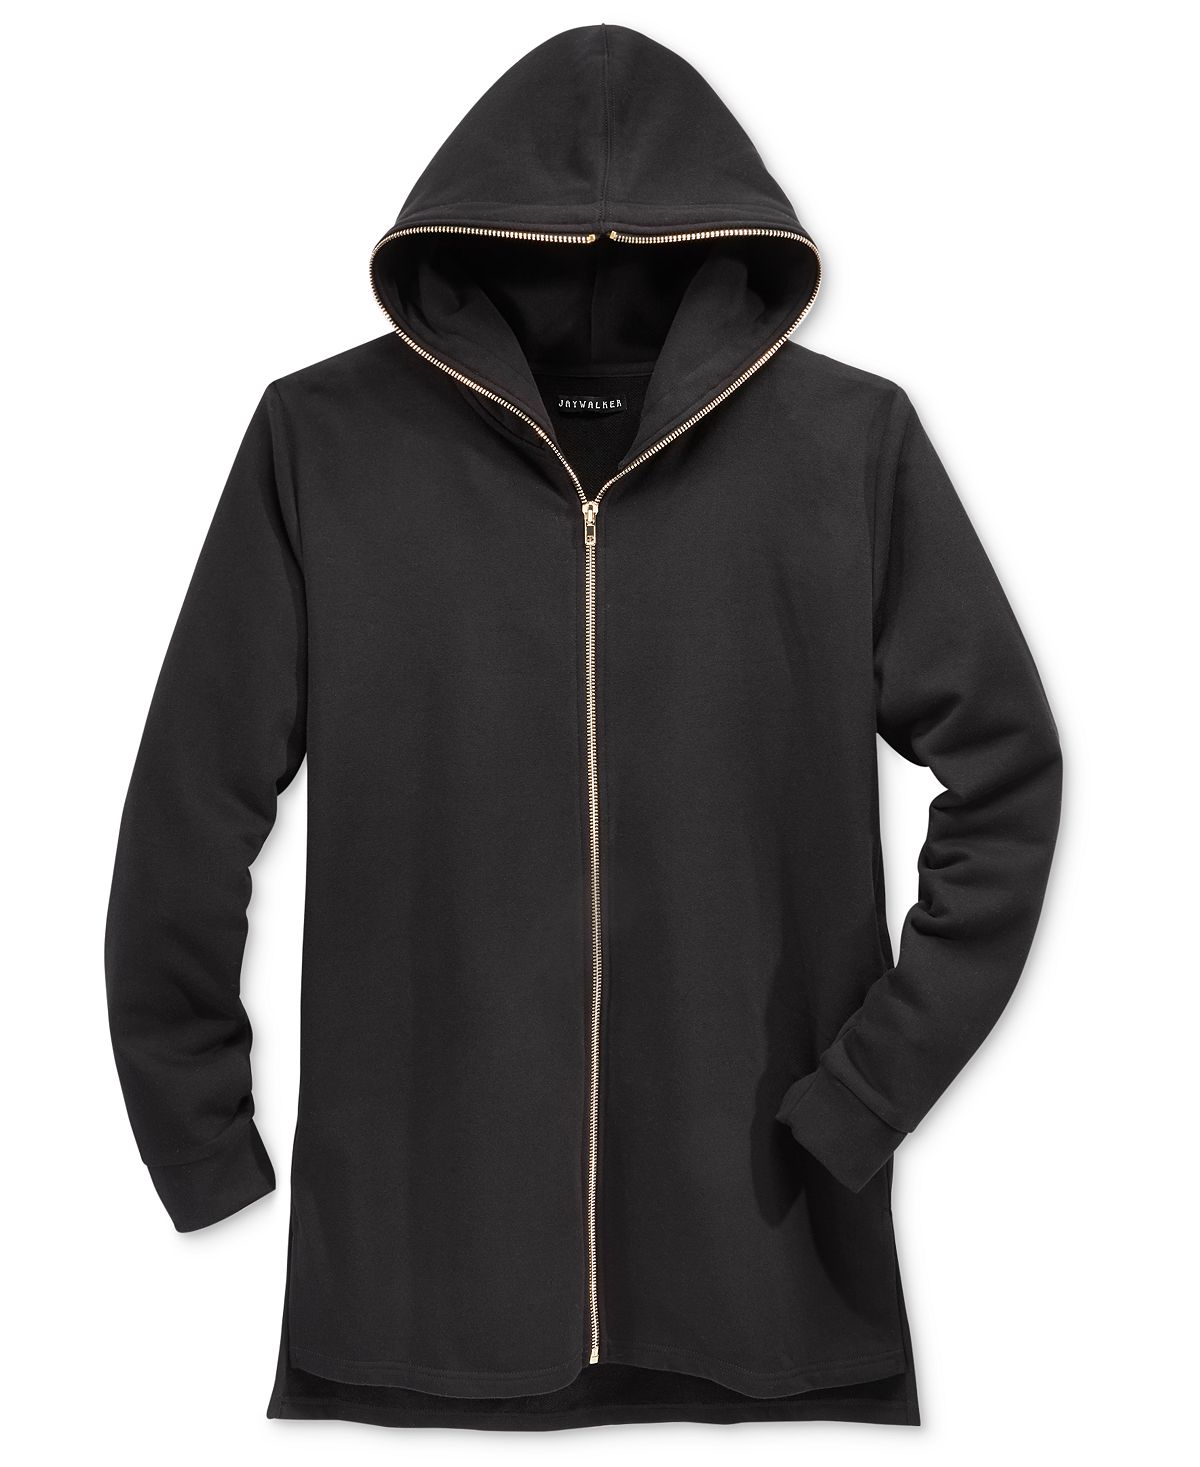 Topson Downs Topson Down Extended Full Zip Hoodie Black